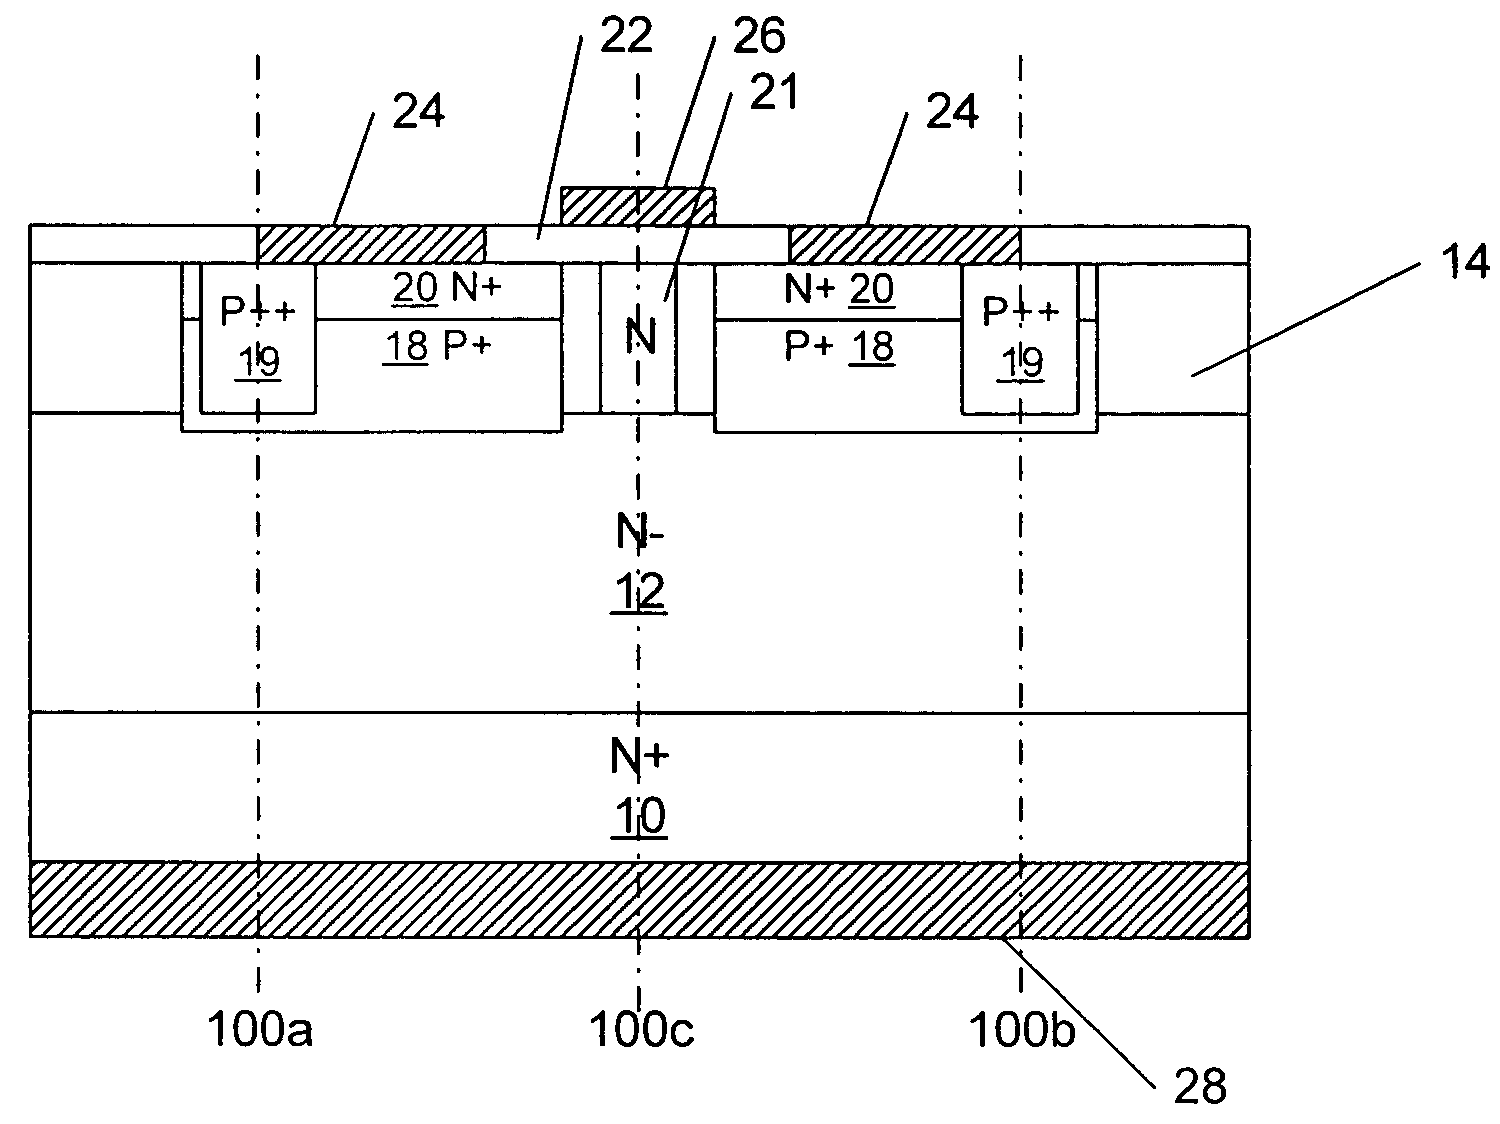 Methods of fabricating silicon carbide devices with hybrid well regions